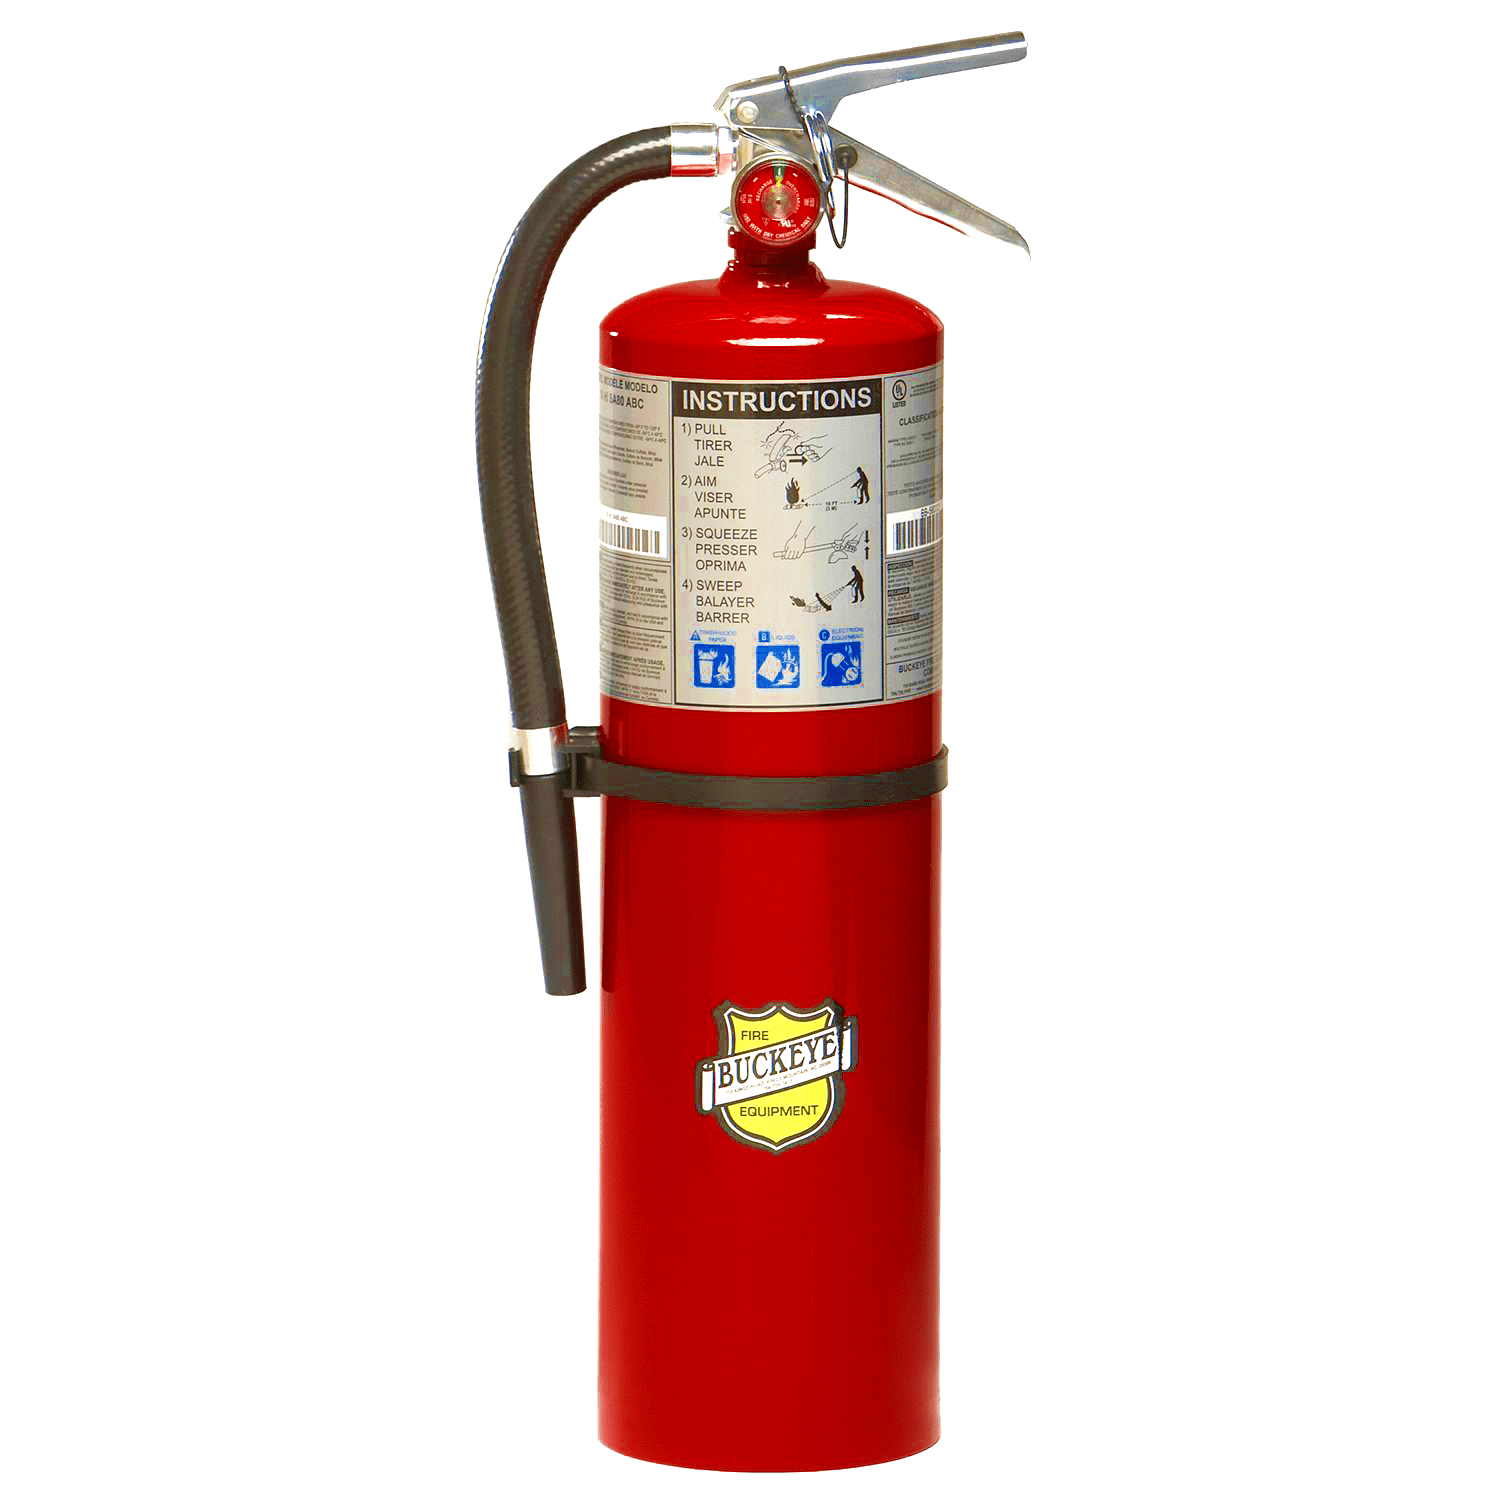 REFURBISHED FIRE EXTINGUISHER 10lb ABC VARIOUS BRANDS SET OF 2  FREE SHIPPING 